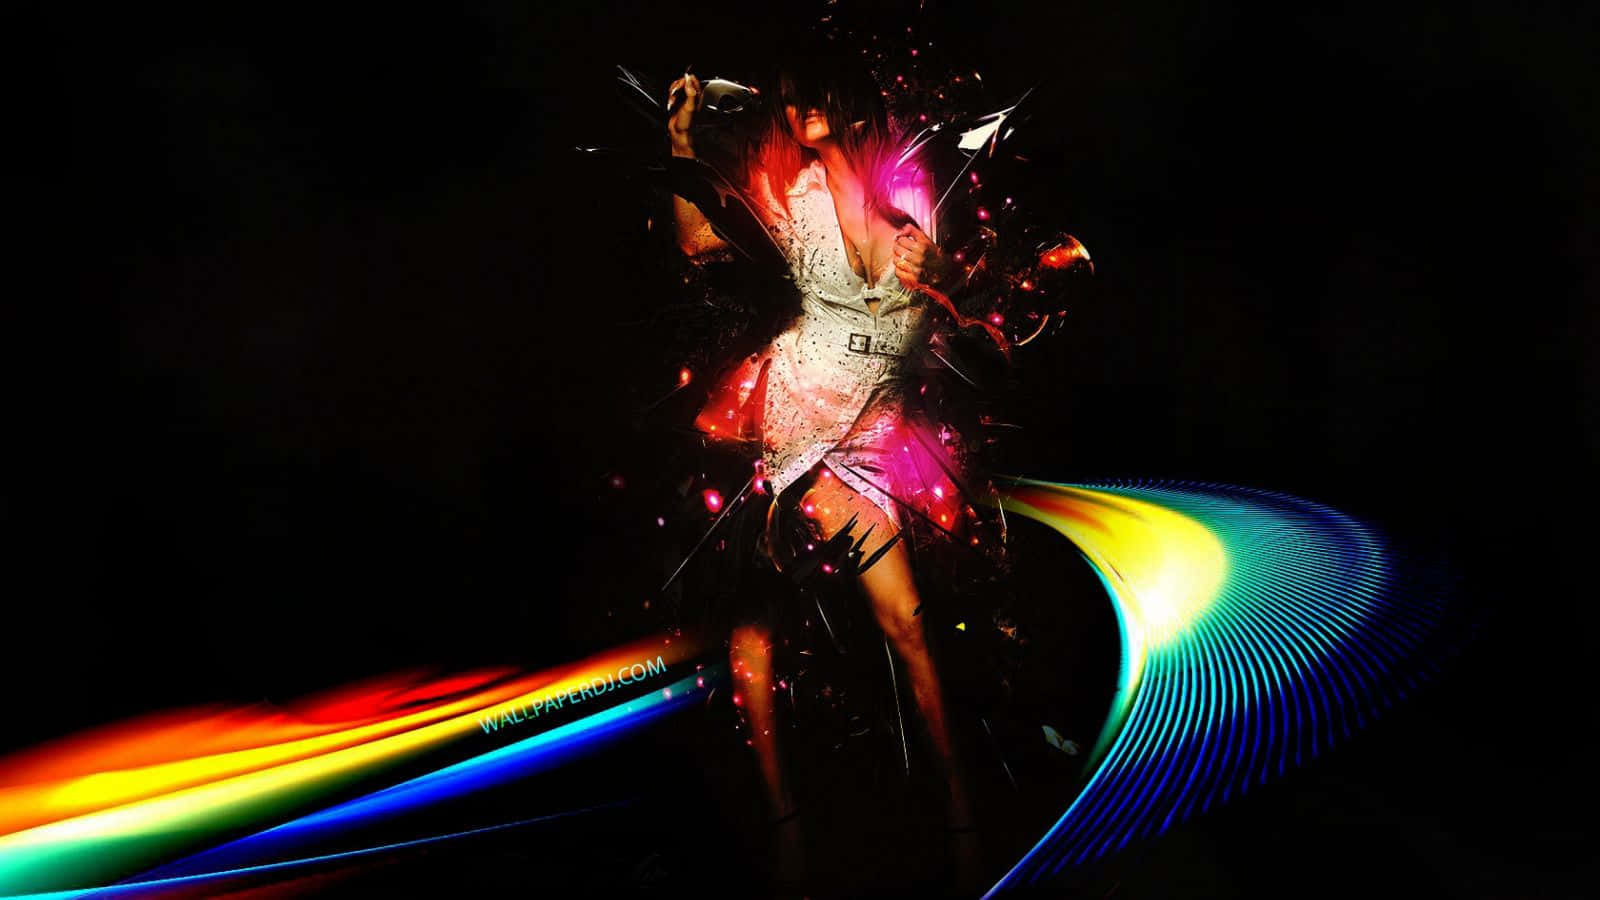 Let the beat take control and immerse yourself in the world of Electronic Dance Music. Wallpaper